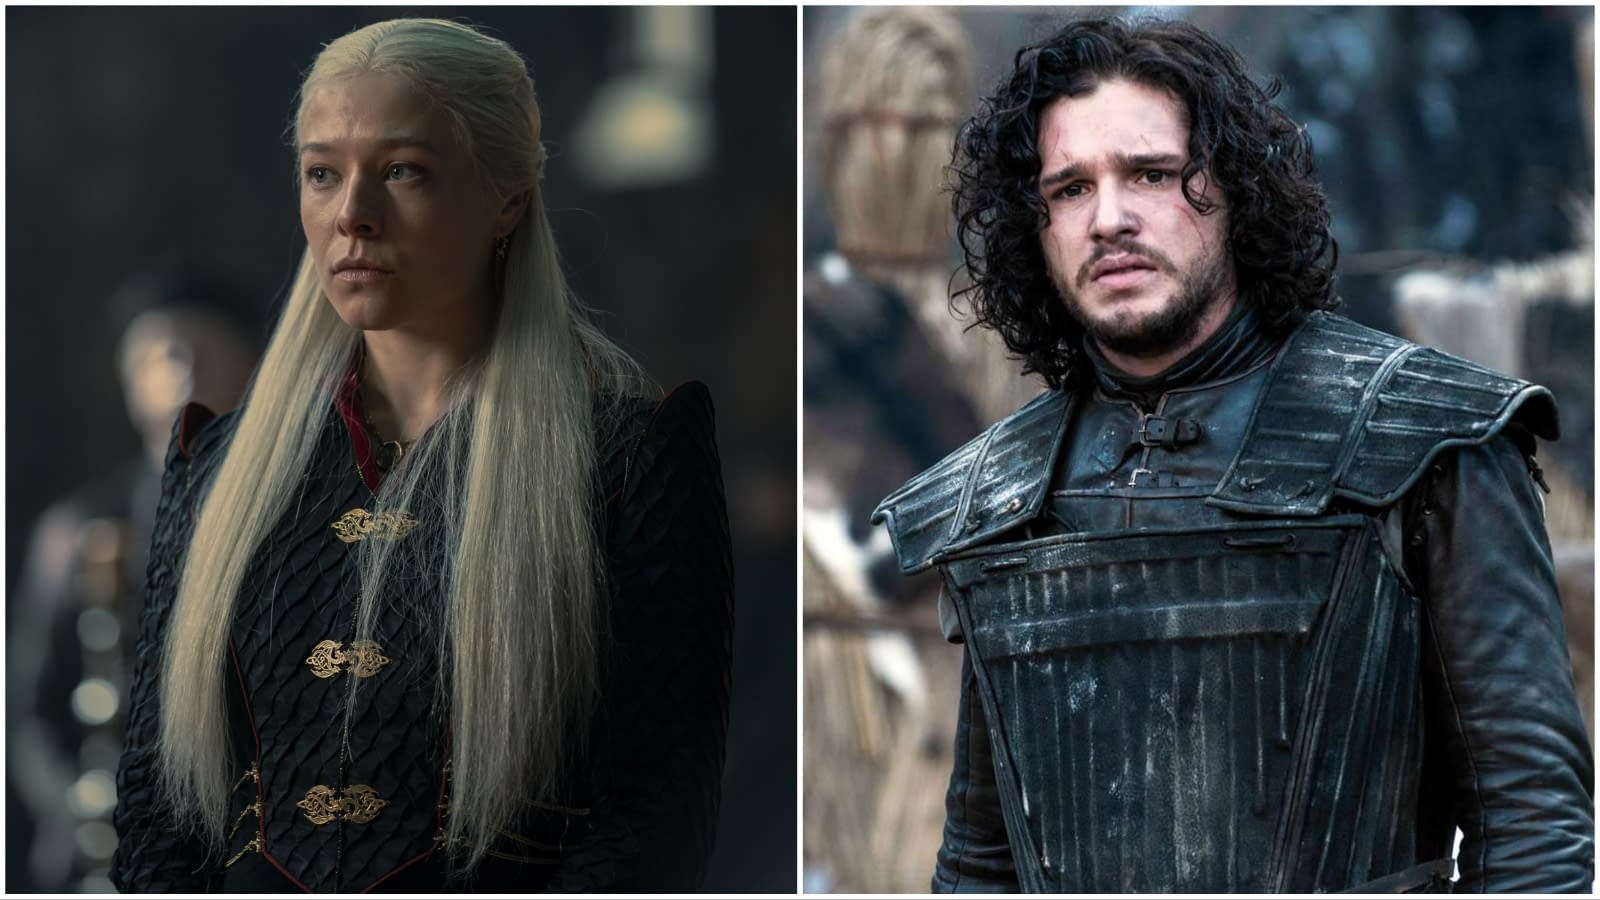 House of the Dragon': 'Game of Thrones' Spinoff Explained